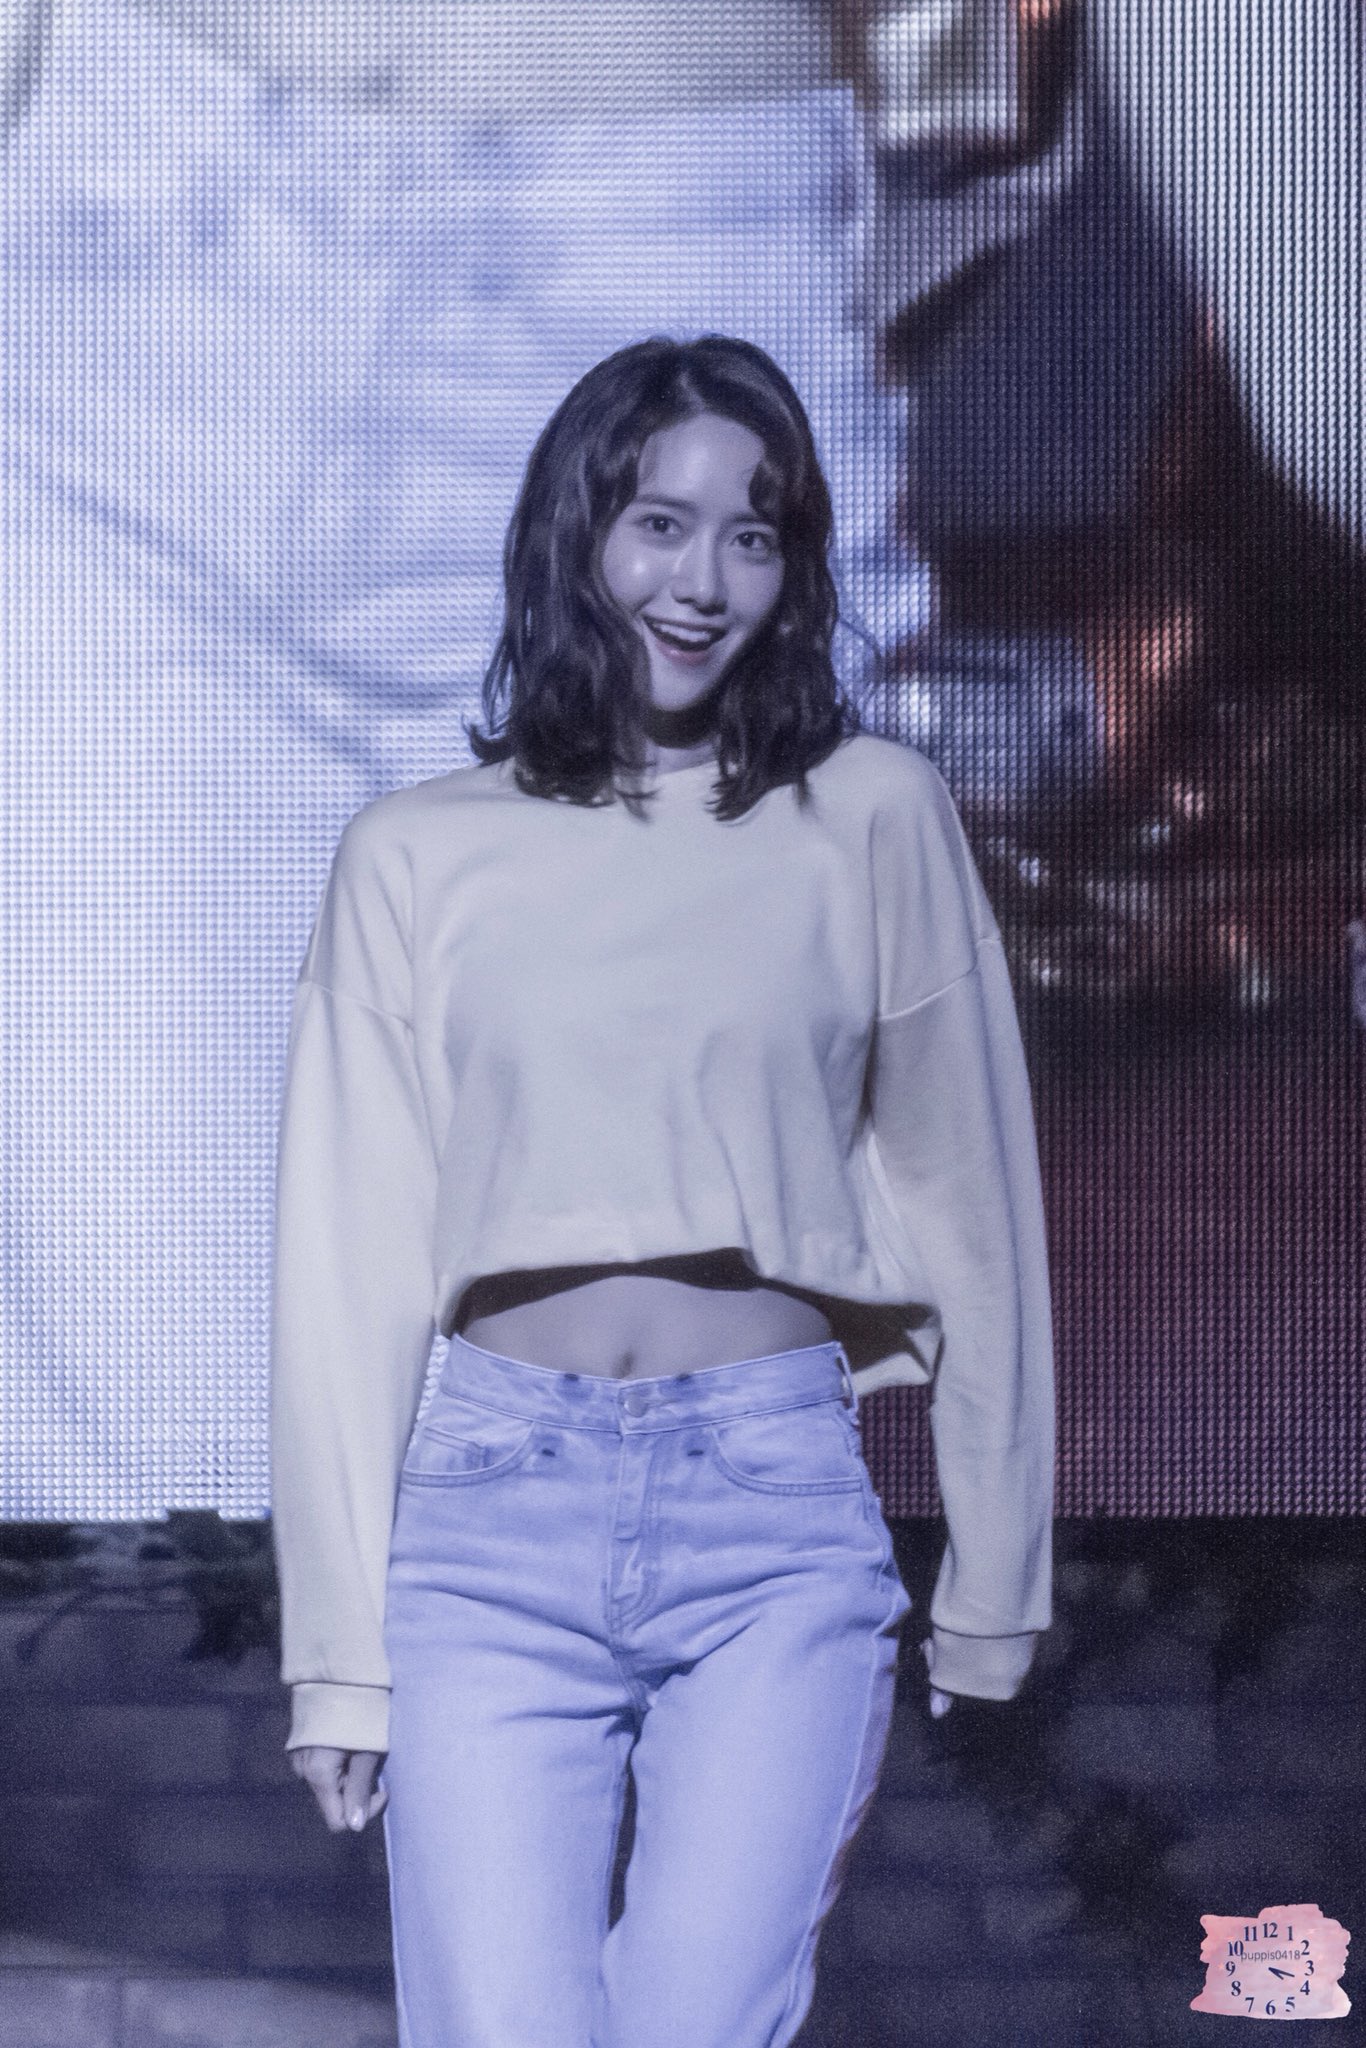 180715 YOONA FANMEETING TOUR, So Wonderful Day #Story_1 in OSAKA 윤아 by puppis041 (3).jpg